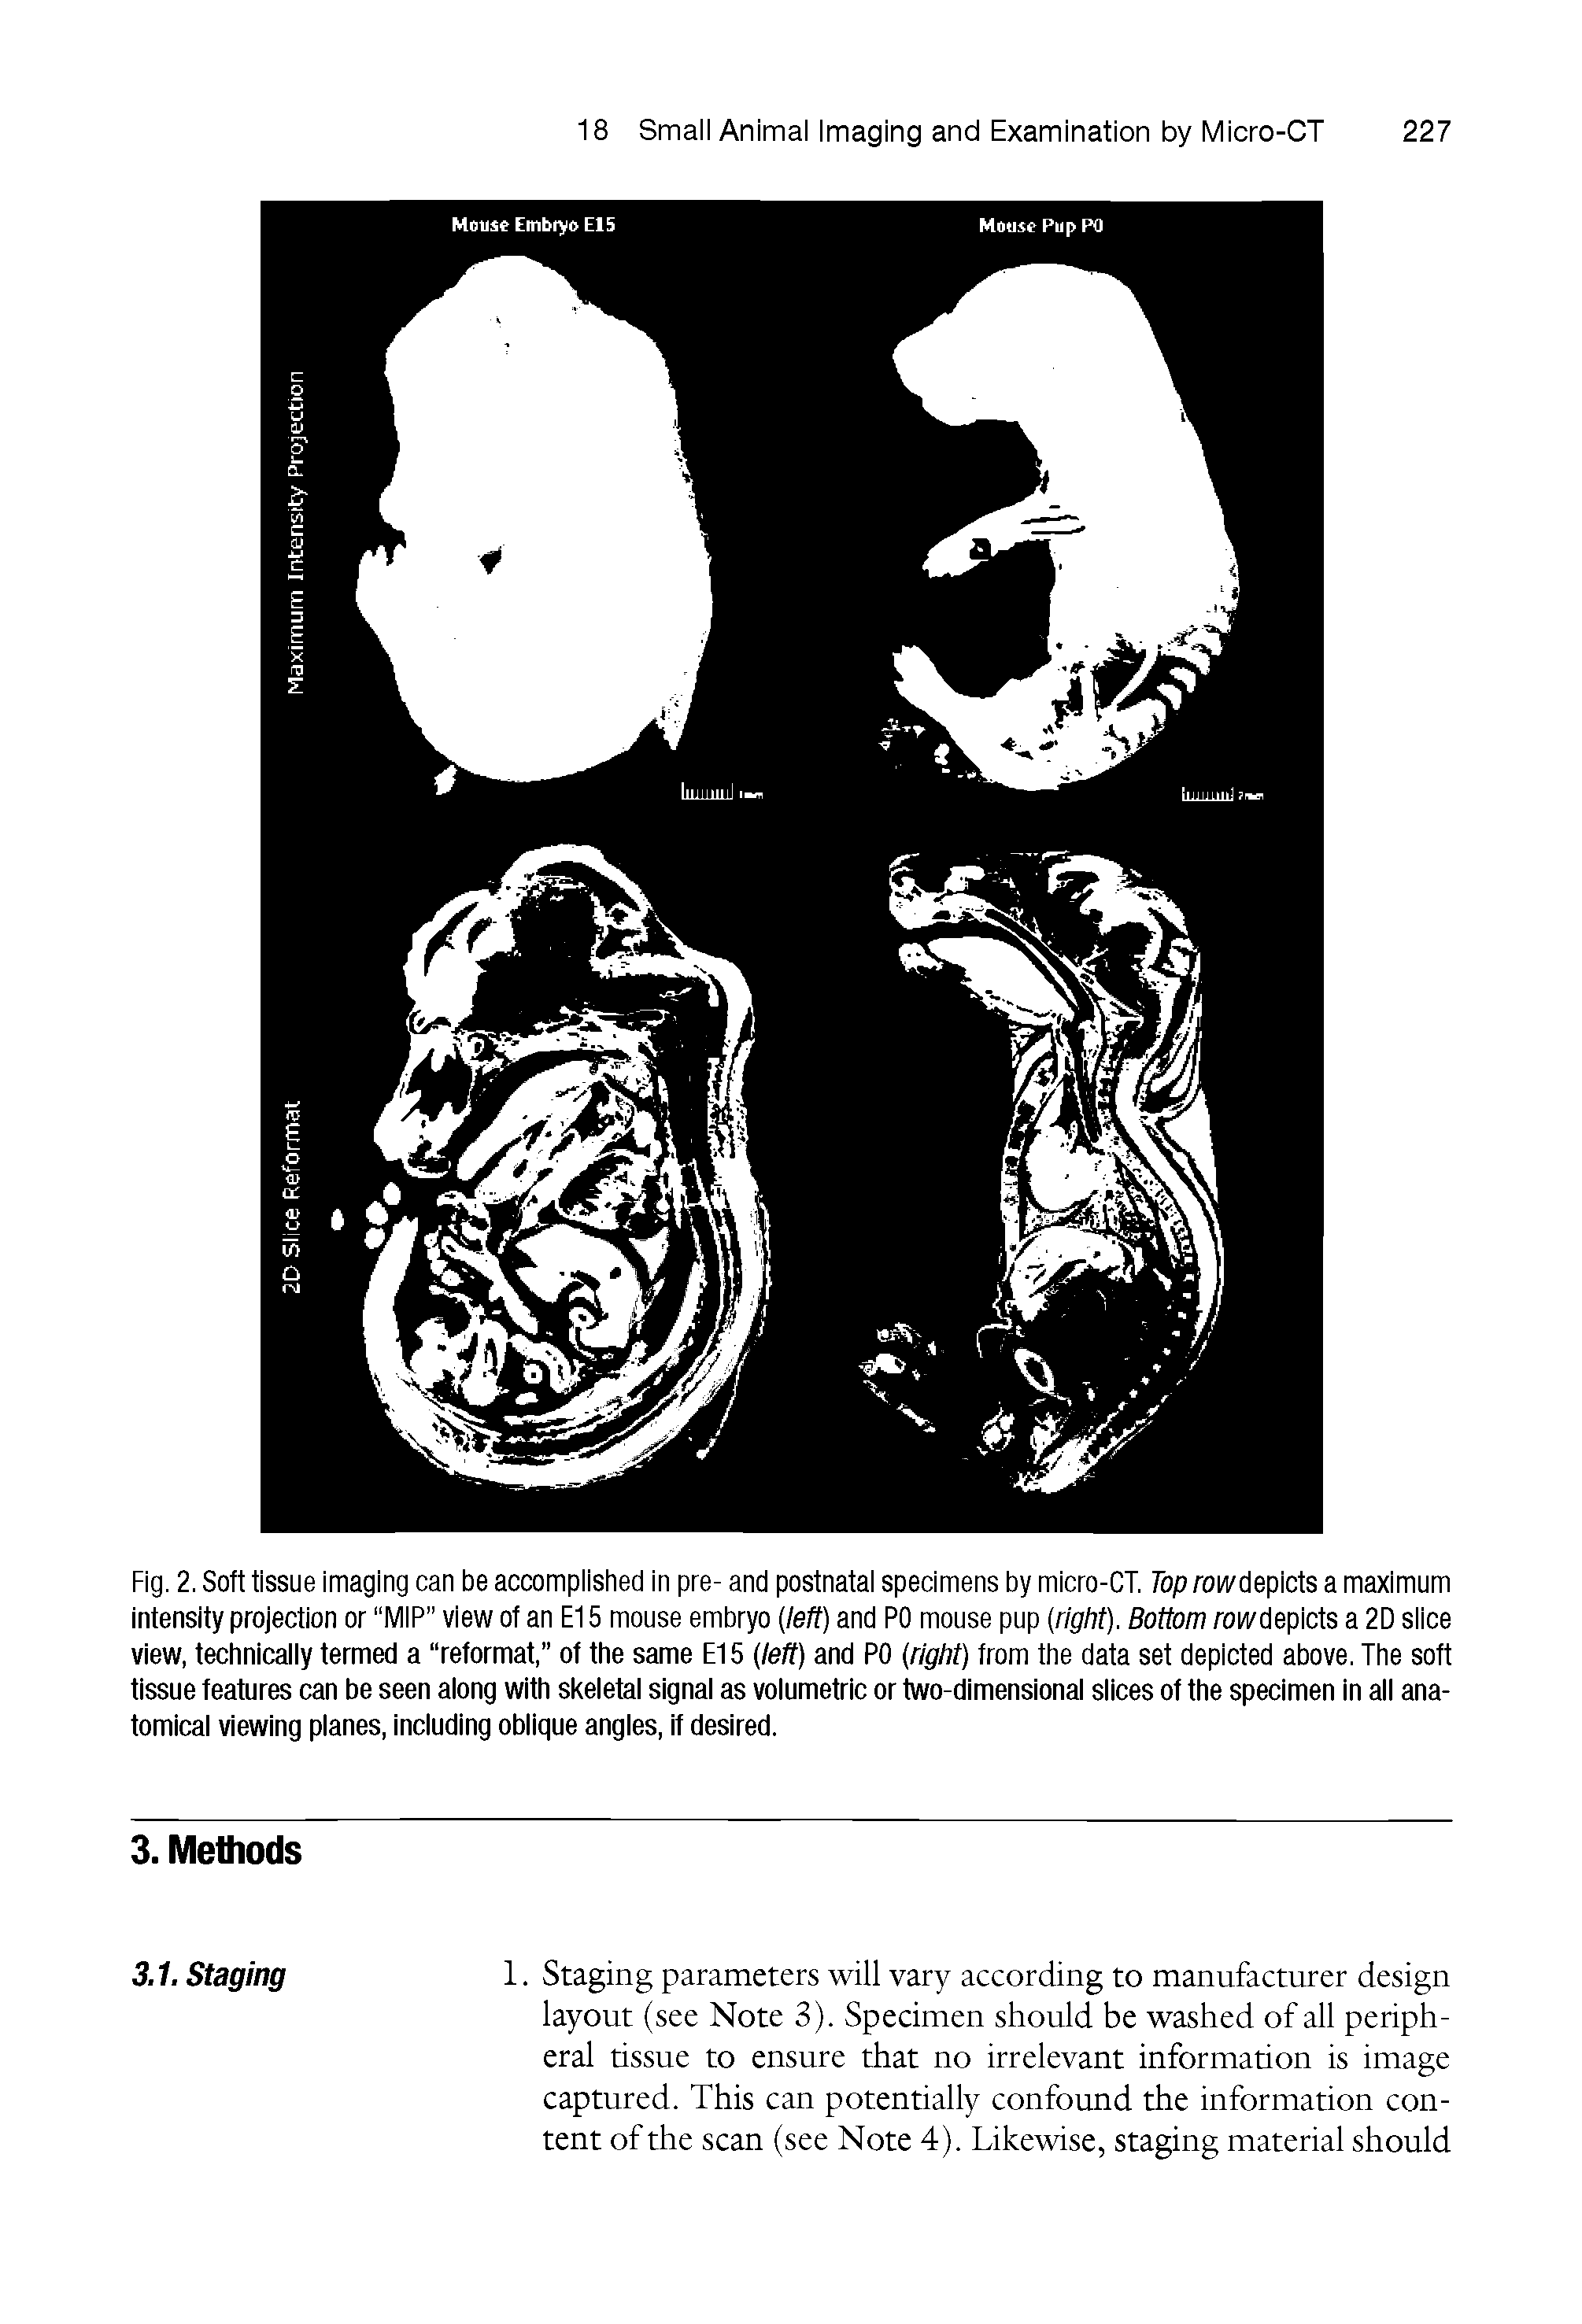 Fig. 2. Soft tissue imaging can be accomplished in pre- and postnatal specimens by micro-CT. Top rowdepicts a maximum intensity projection or WIIP view of an El 5 mouse embryo left) and PO mouse pup (right). Bottom rowdepicts a 2D slice view, technically termed a reformat, of the same El 5 (left) and PO (right) from the data set depicted above. The soft tissue features can be seen along with skeletal signal as volumetric or two-dimensional slices of the specimen in all anatomical viewing planes, including oblique angles, if desired.